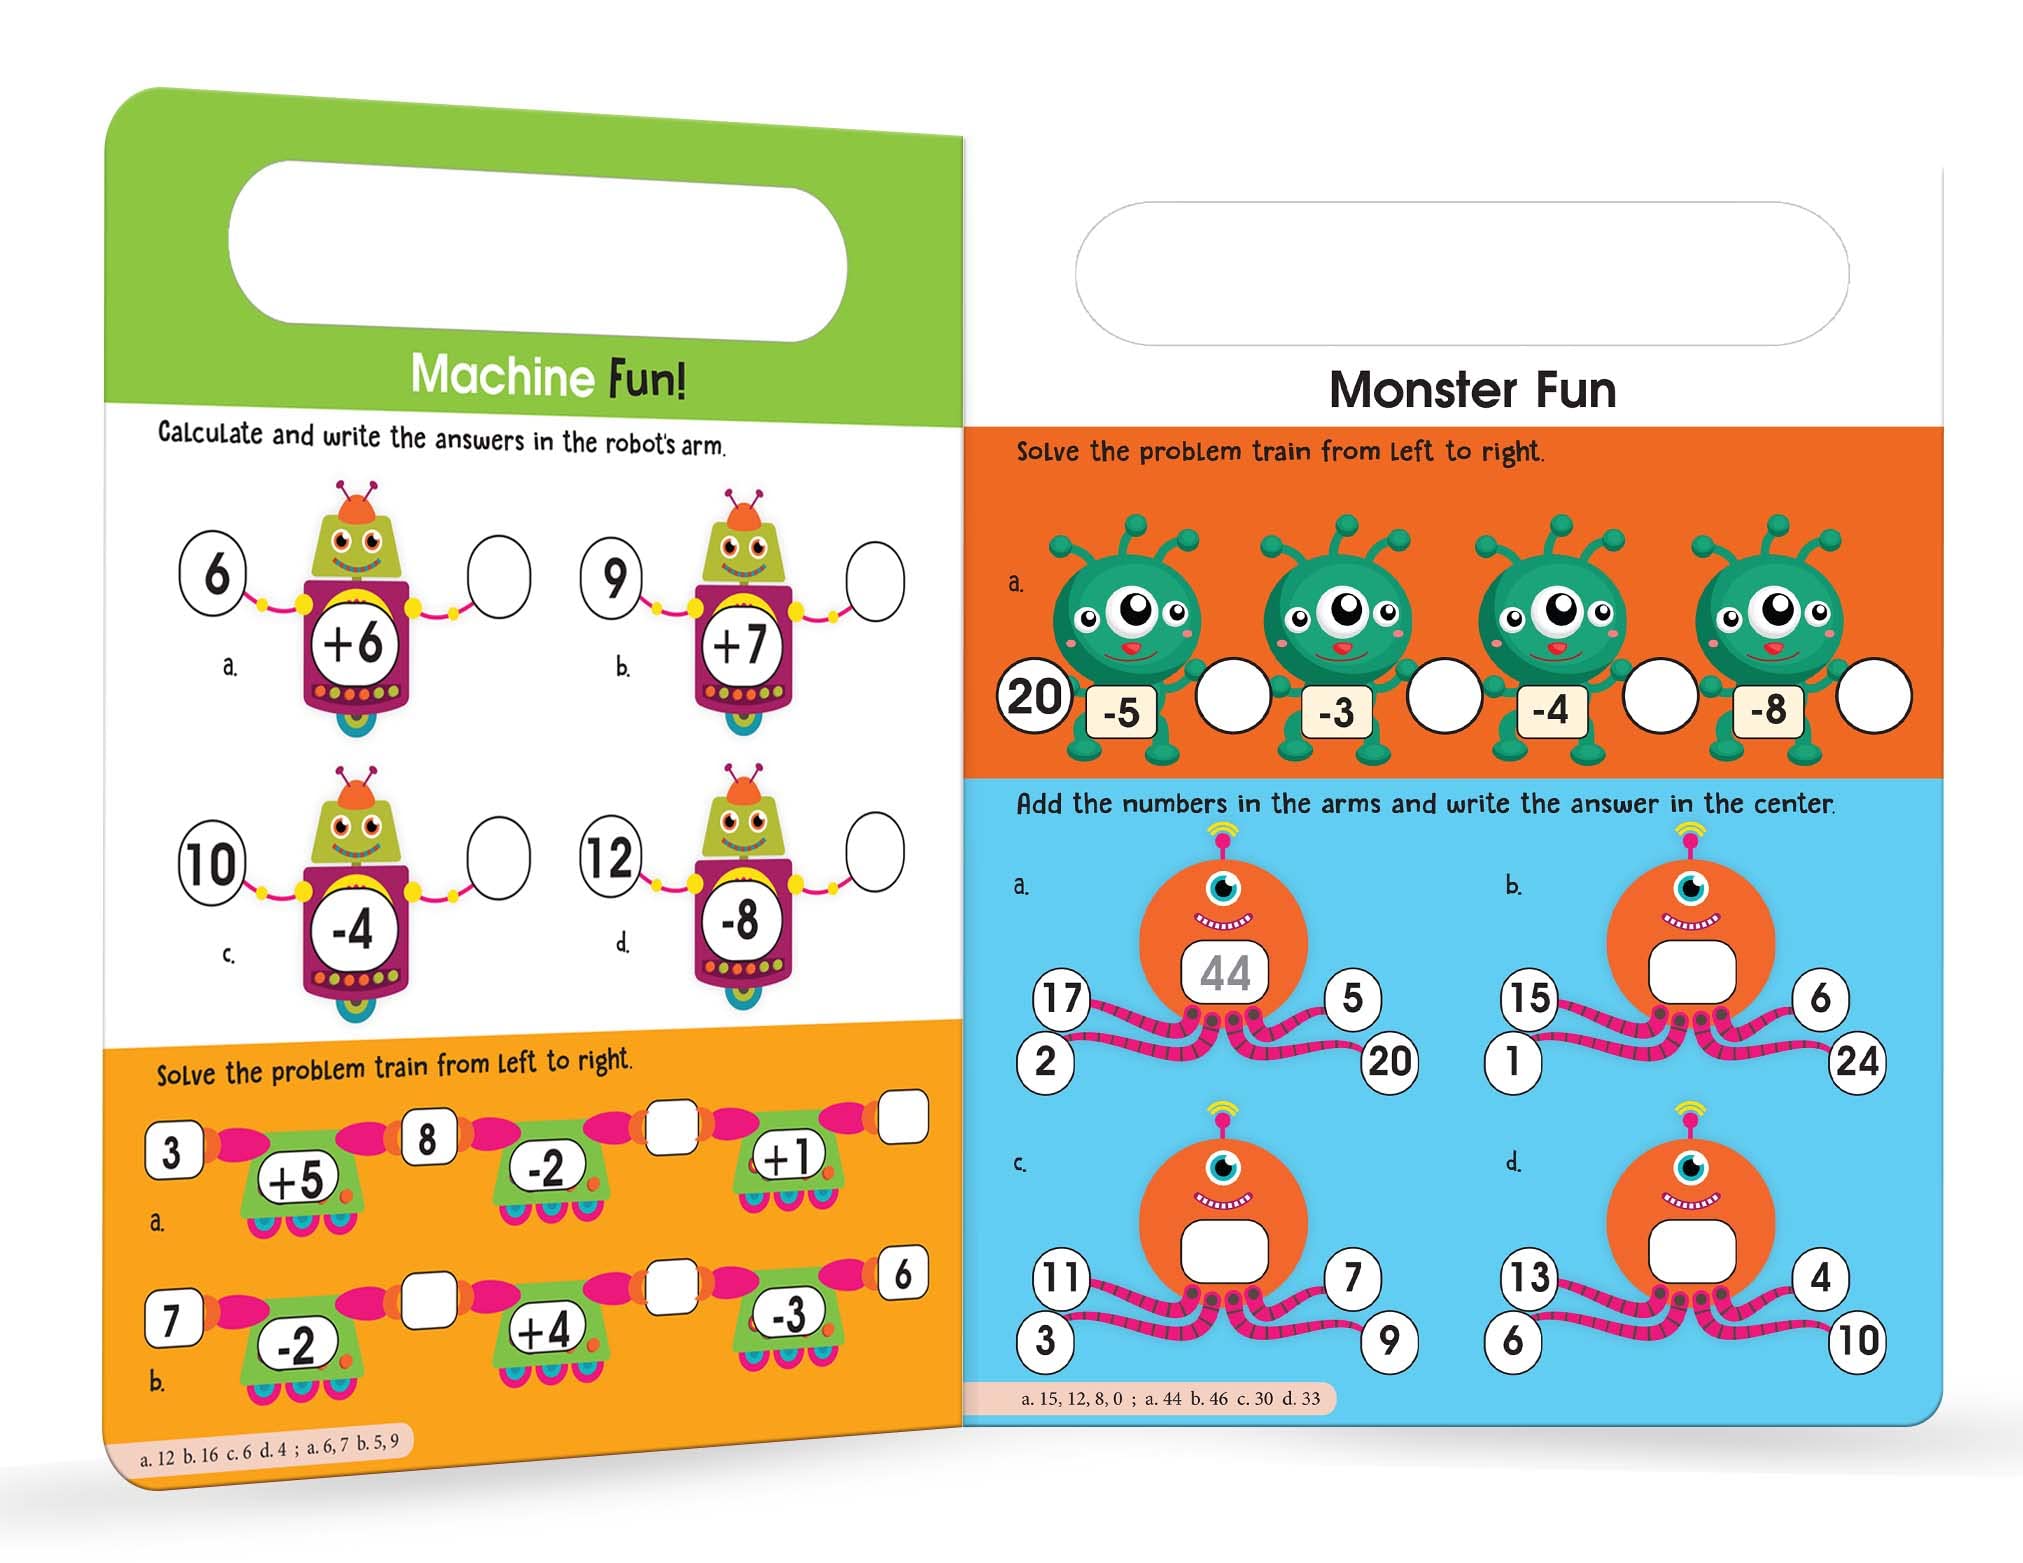 My Big Wipe And Clean Book of Add And Subtract : Fun With Numbers Board book